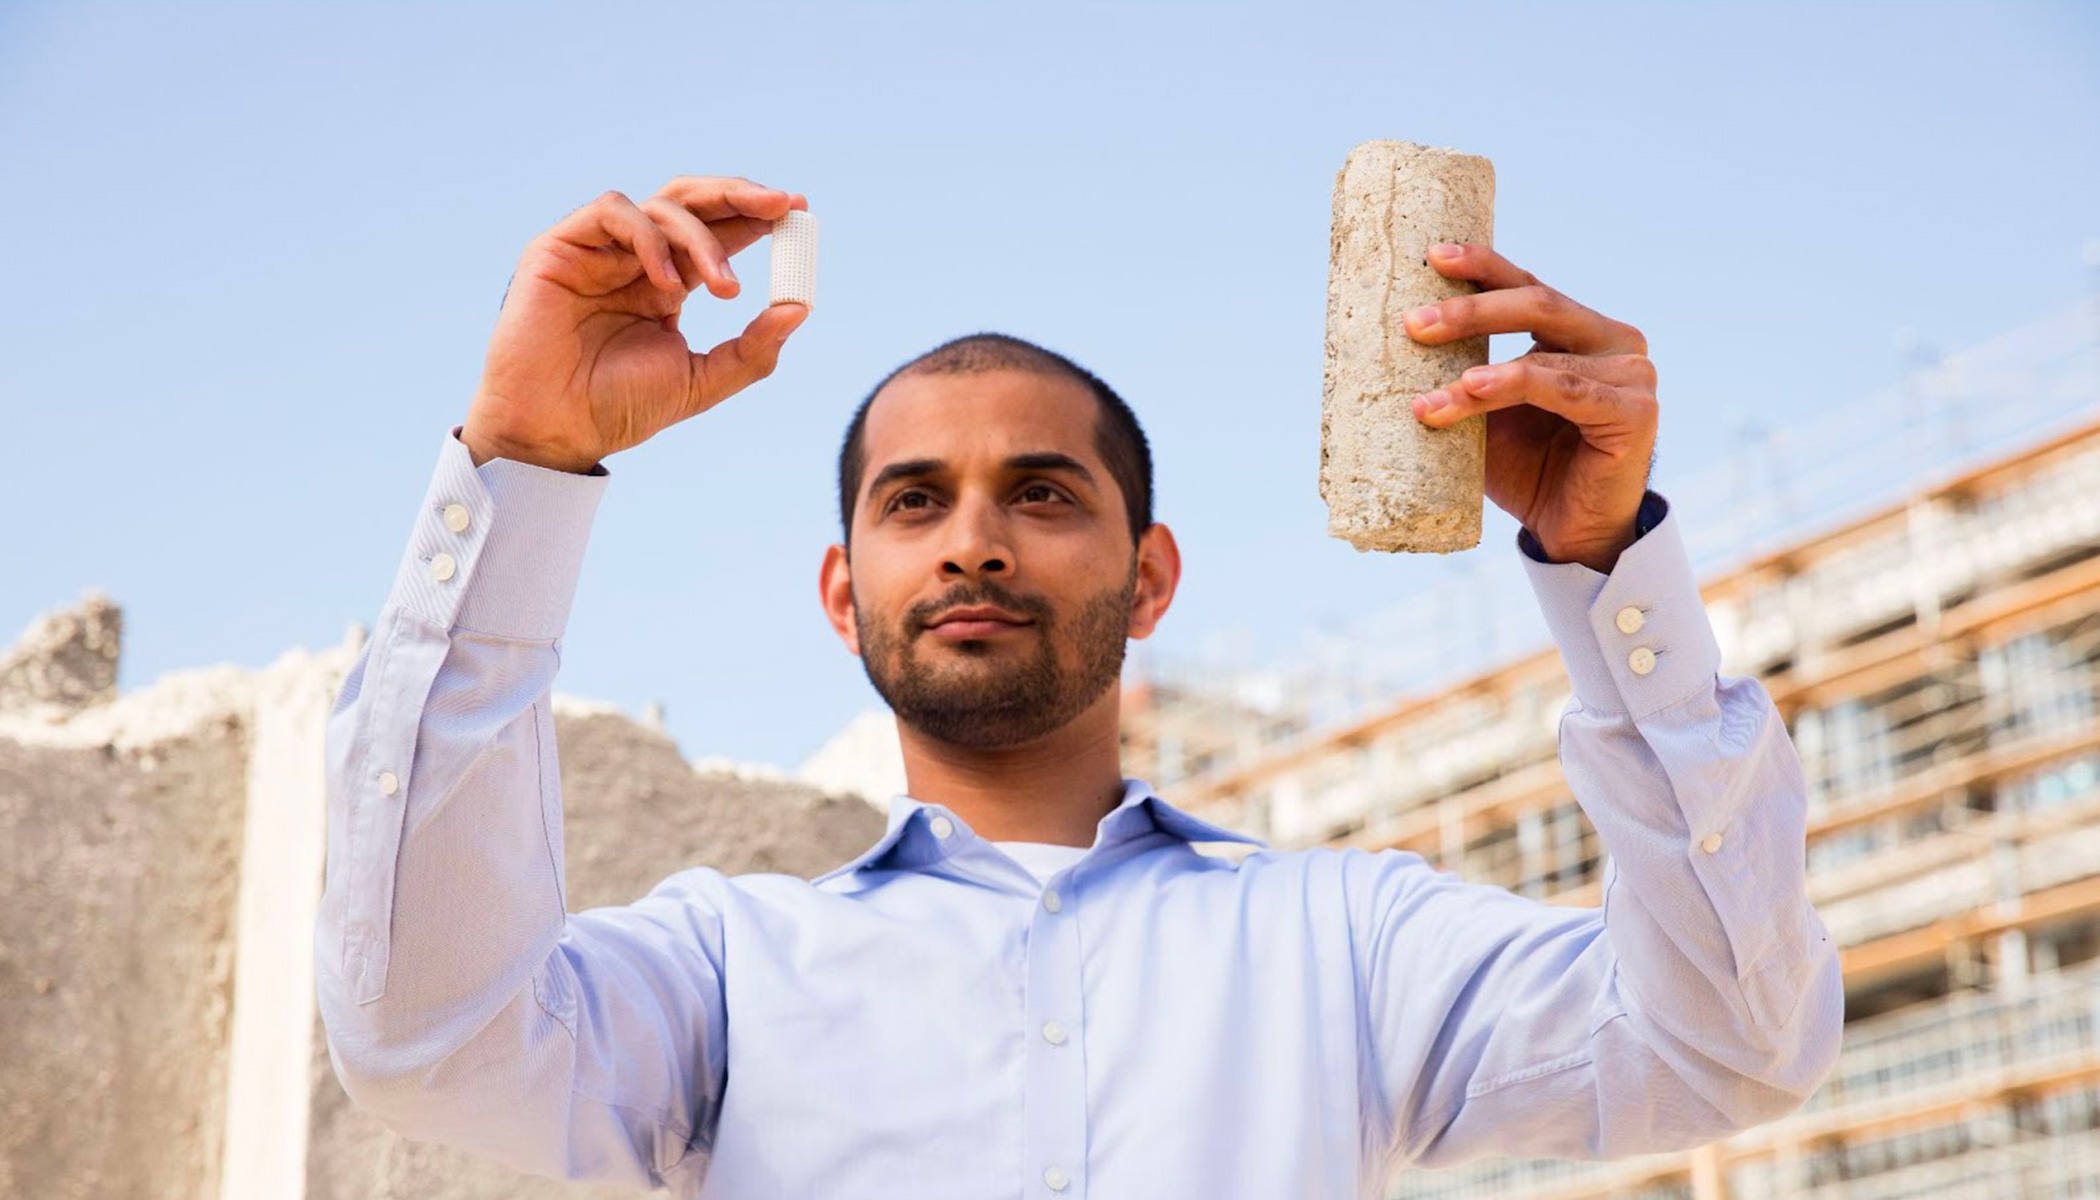 Gaurav, in blue shirt, holds a thimble-sized piece of low-carbon concrete in his left hand and a bottle-sized piece of concrete in his right hand.